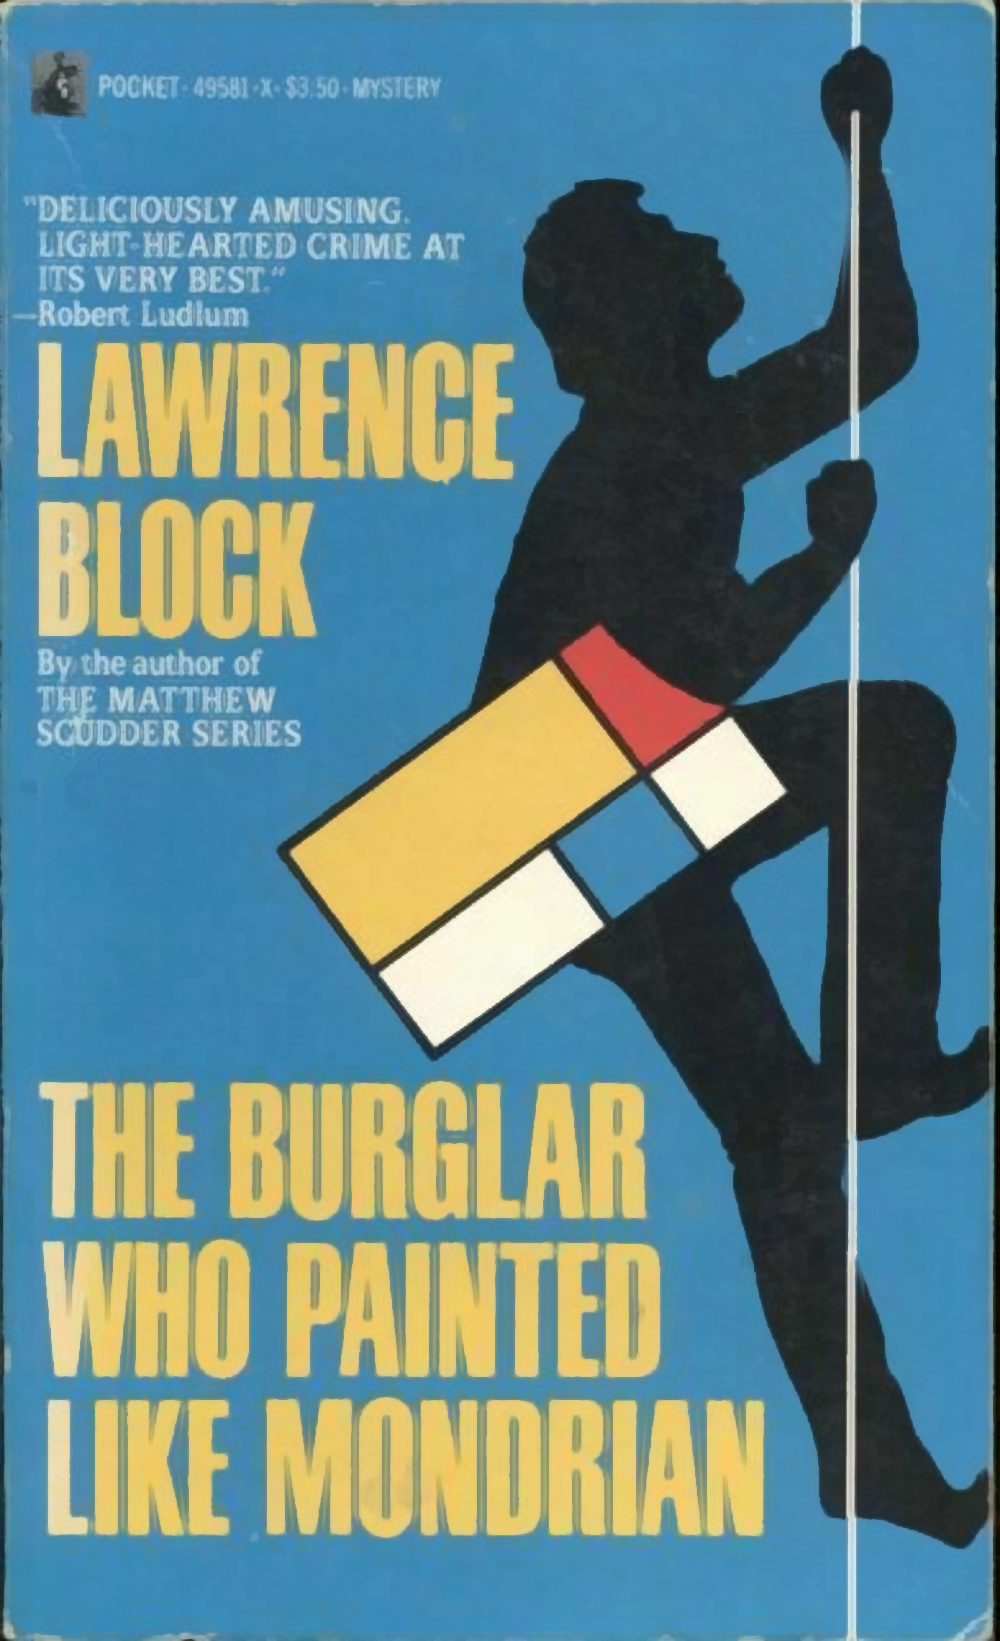 The Burgler Who Painted Like Mondrian by Lawrence Block